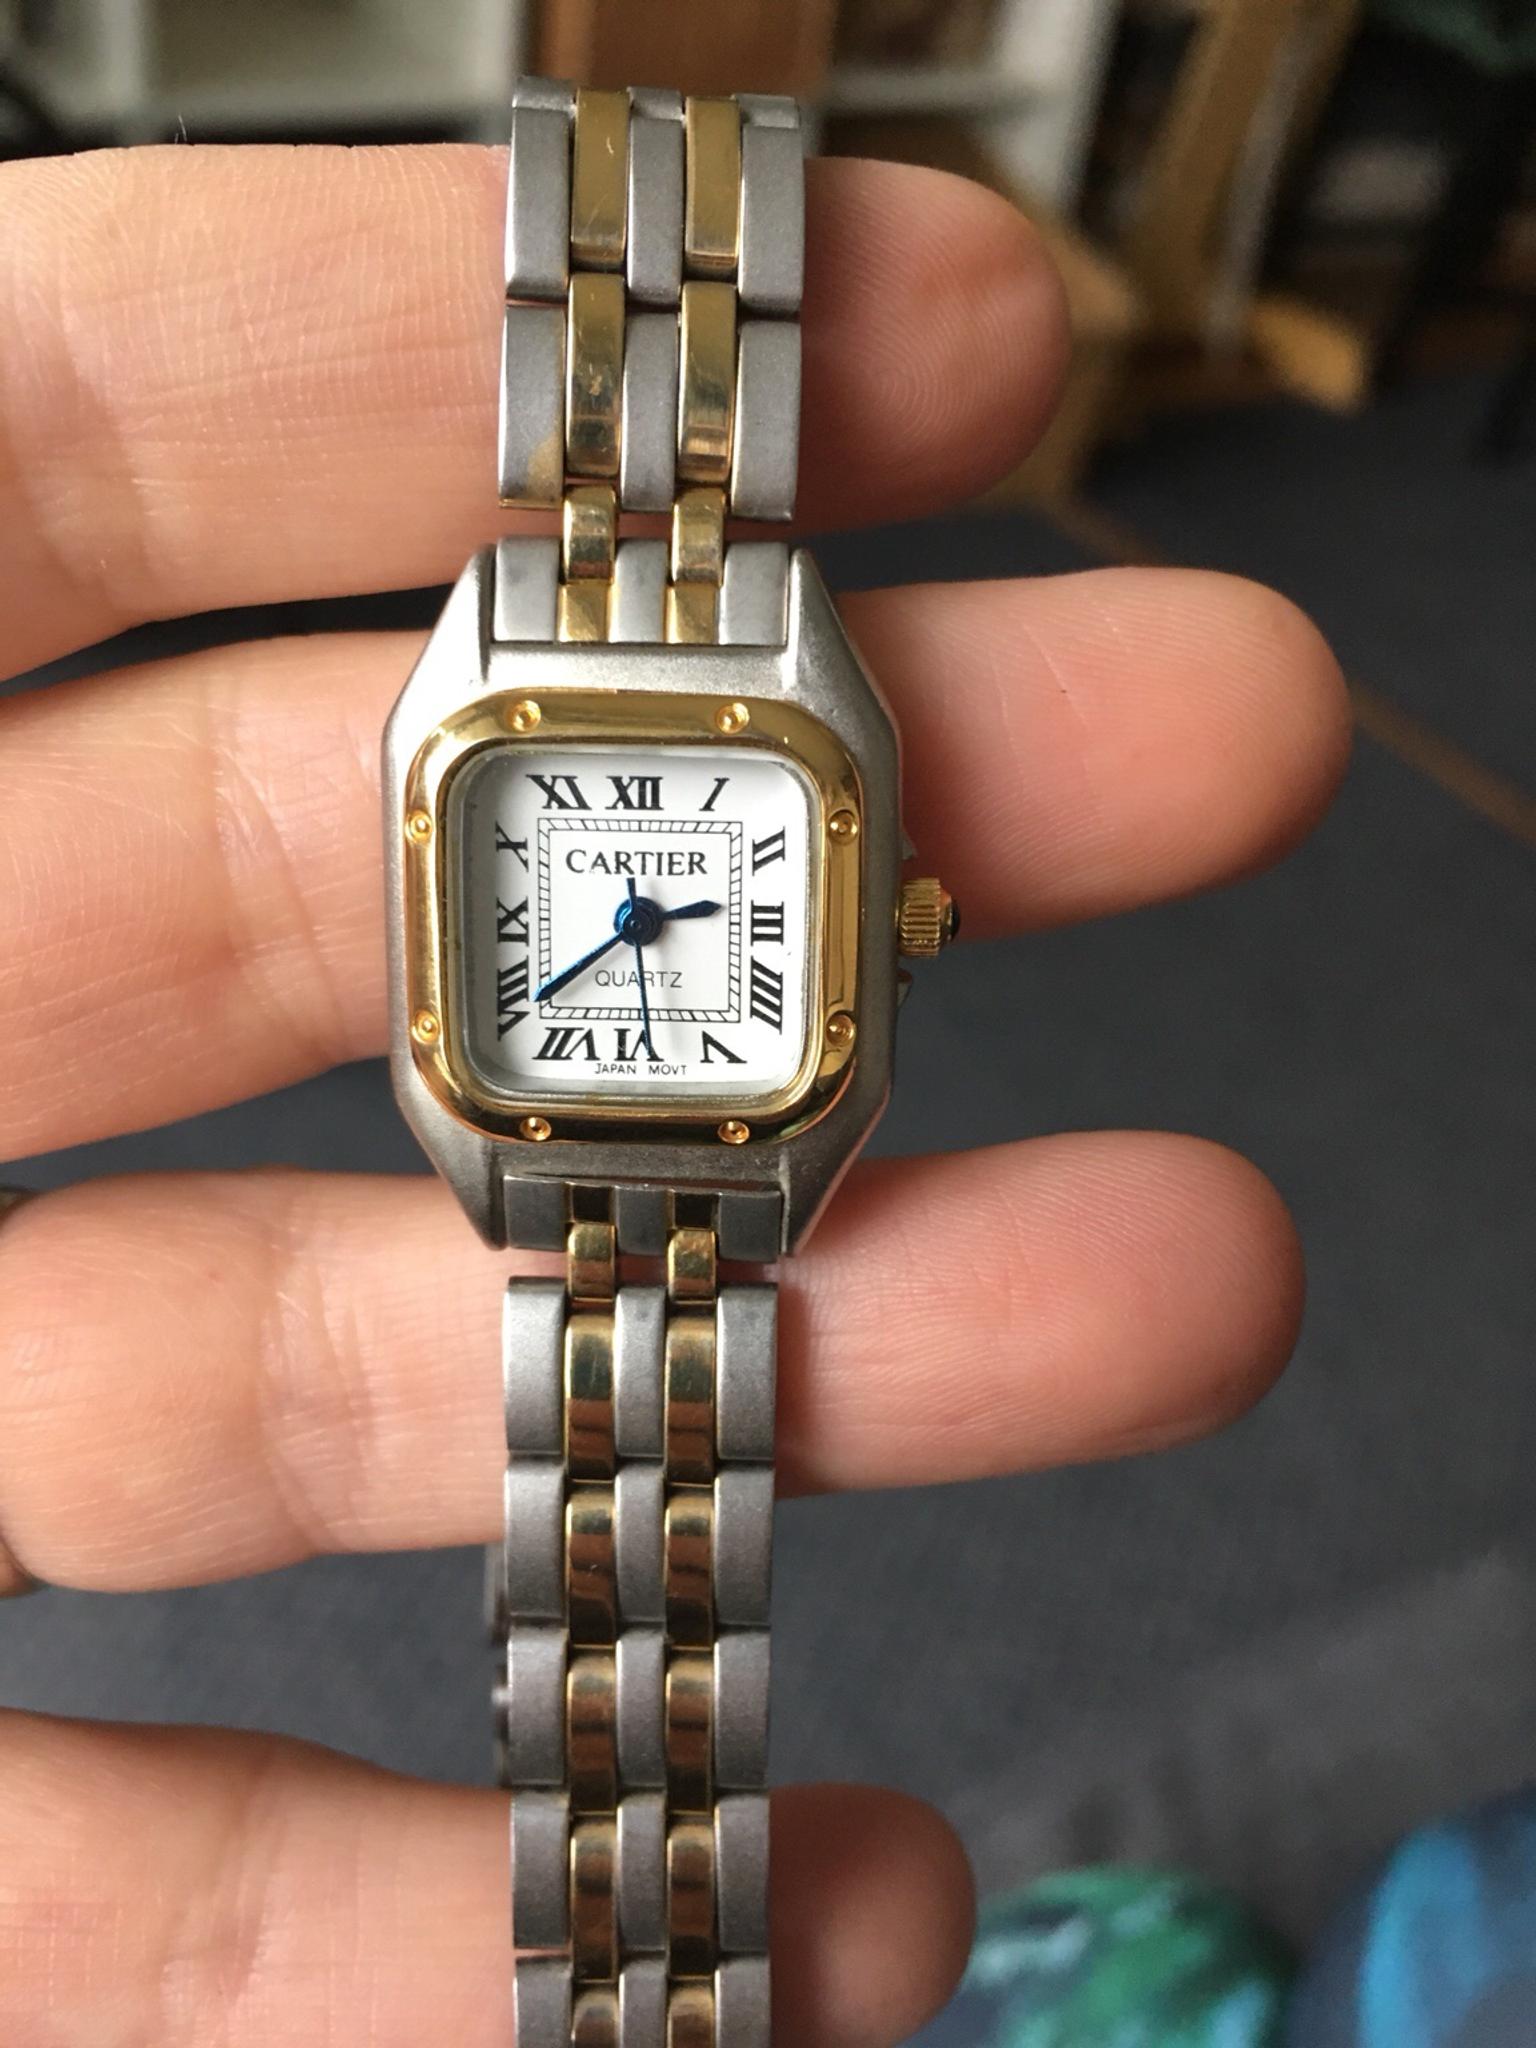 Cartier Vintage Watch Replica In Sw2 Lambeth For 50 00 For Sale Shpock